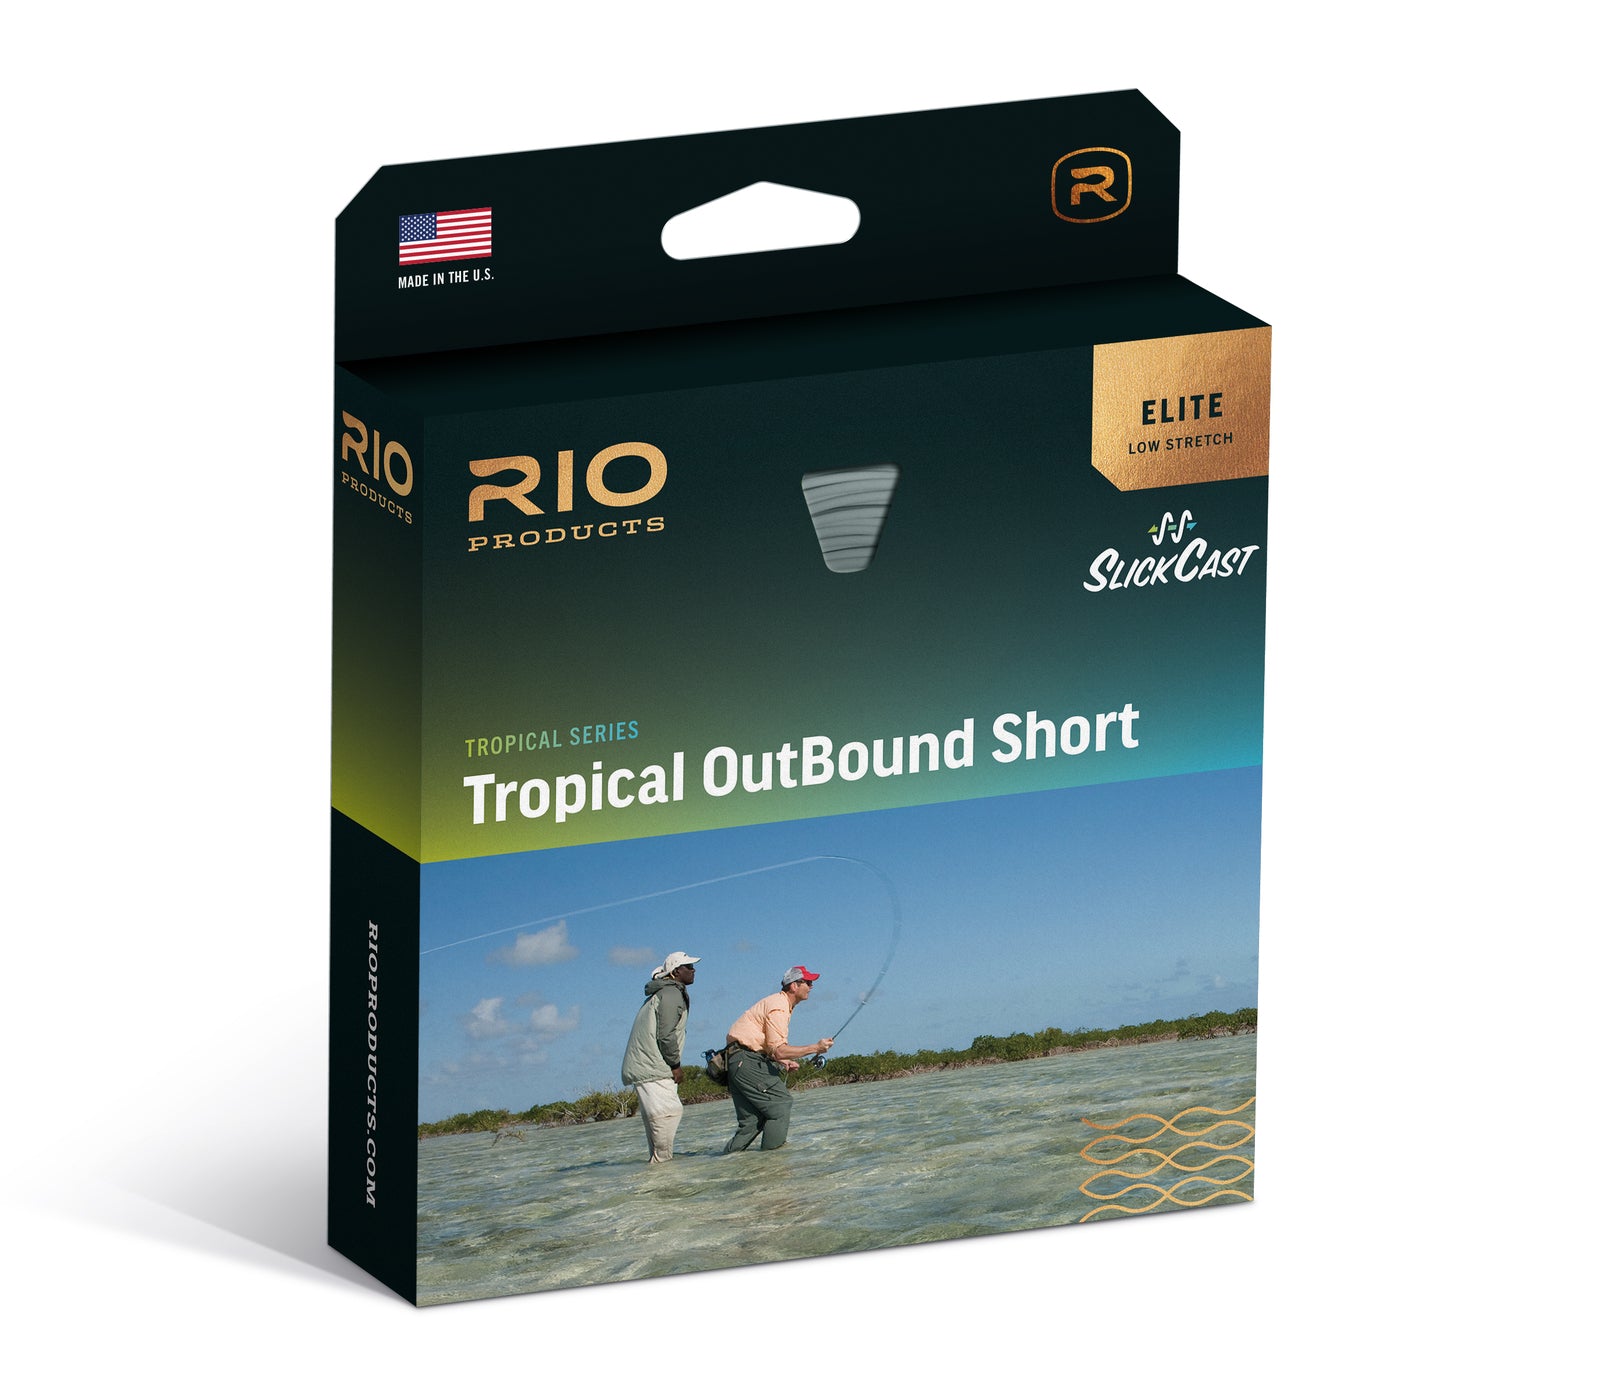 Rio Leviathan Saltwater Fly Lines - Saltwater Fly Line - Farlows